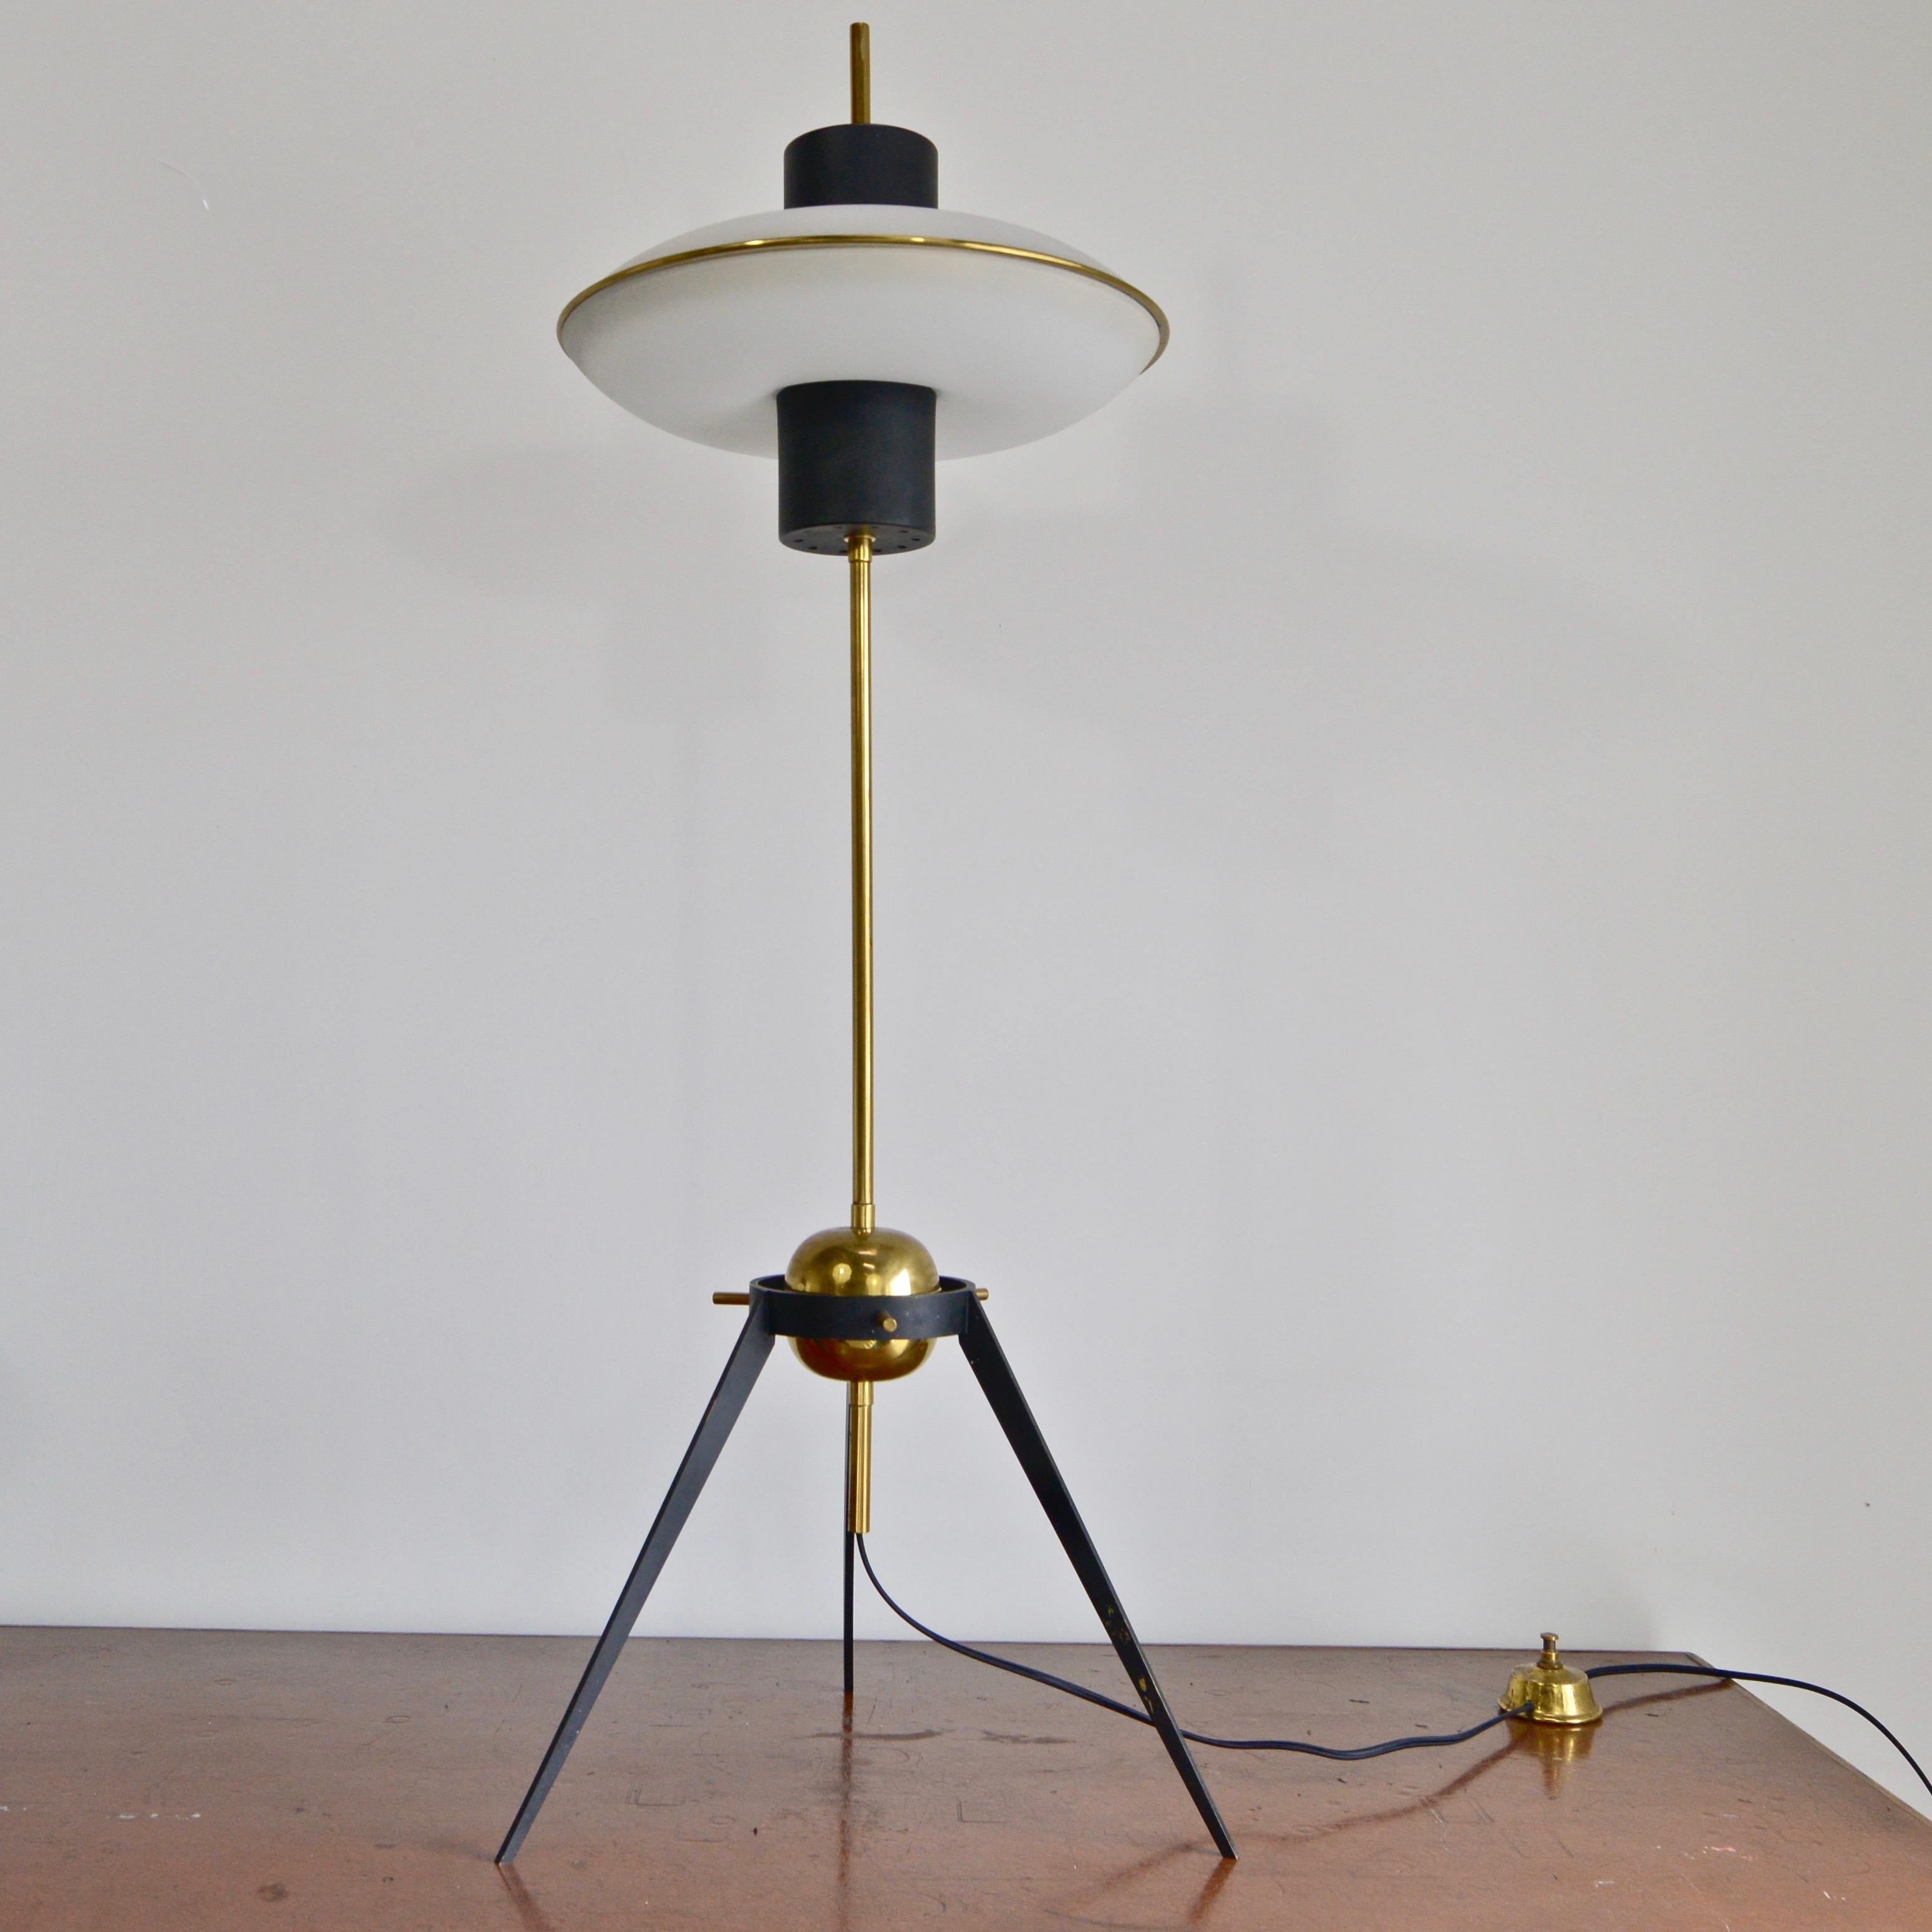 Of the period attributed to Stilnovo, circa 1958 Italy. Fully rewired with (3) E26 medium based sockets, ready to be used in the USA. Finish: original finish, painted brass, glass and steel. Partially restored. Measurements:
Measures: Height